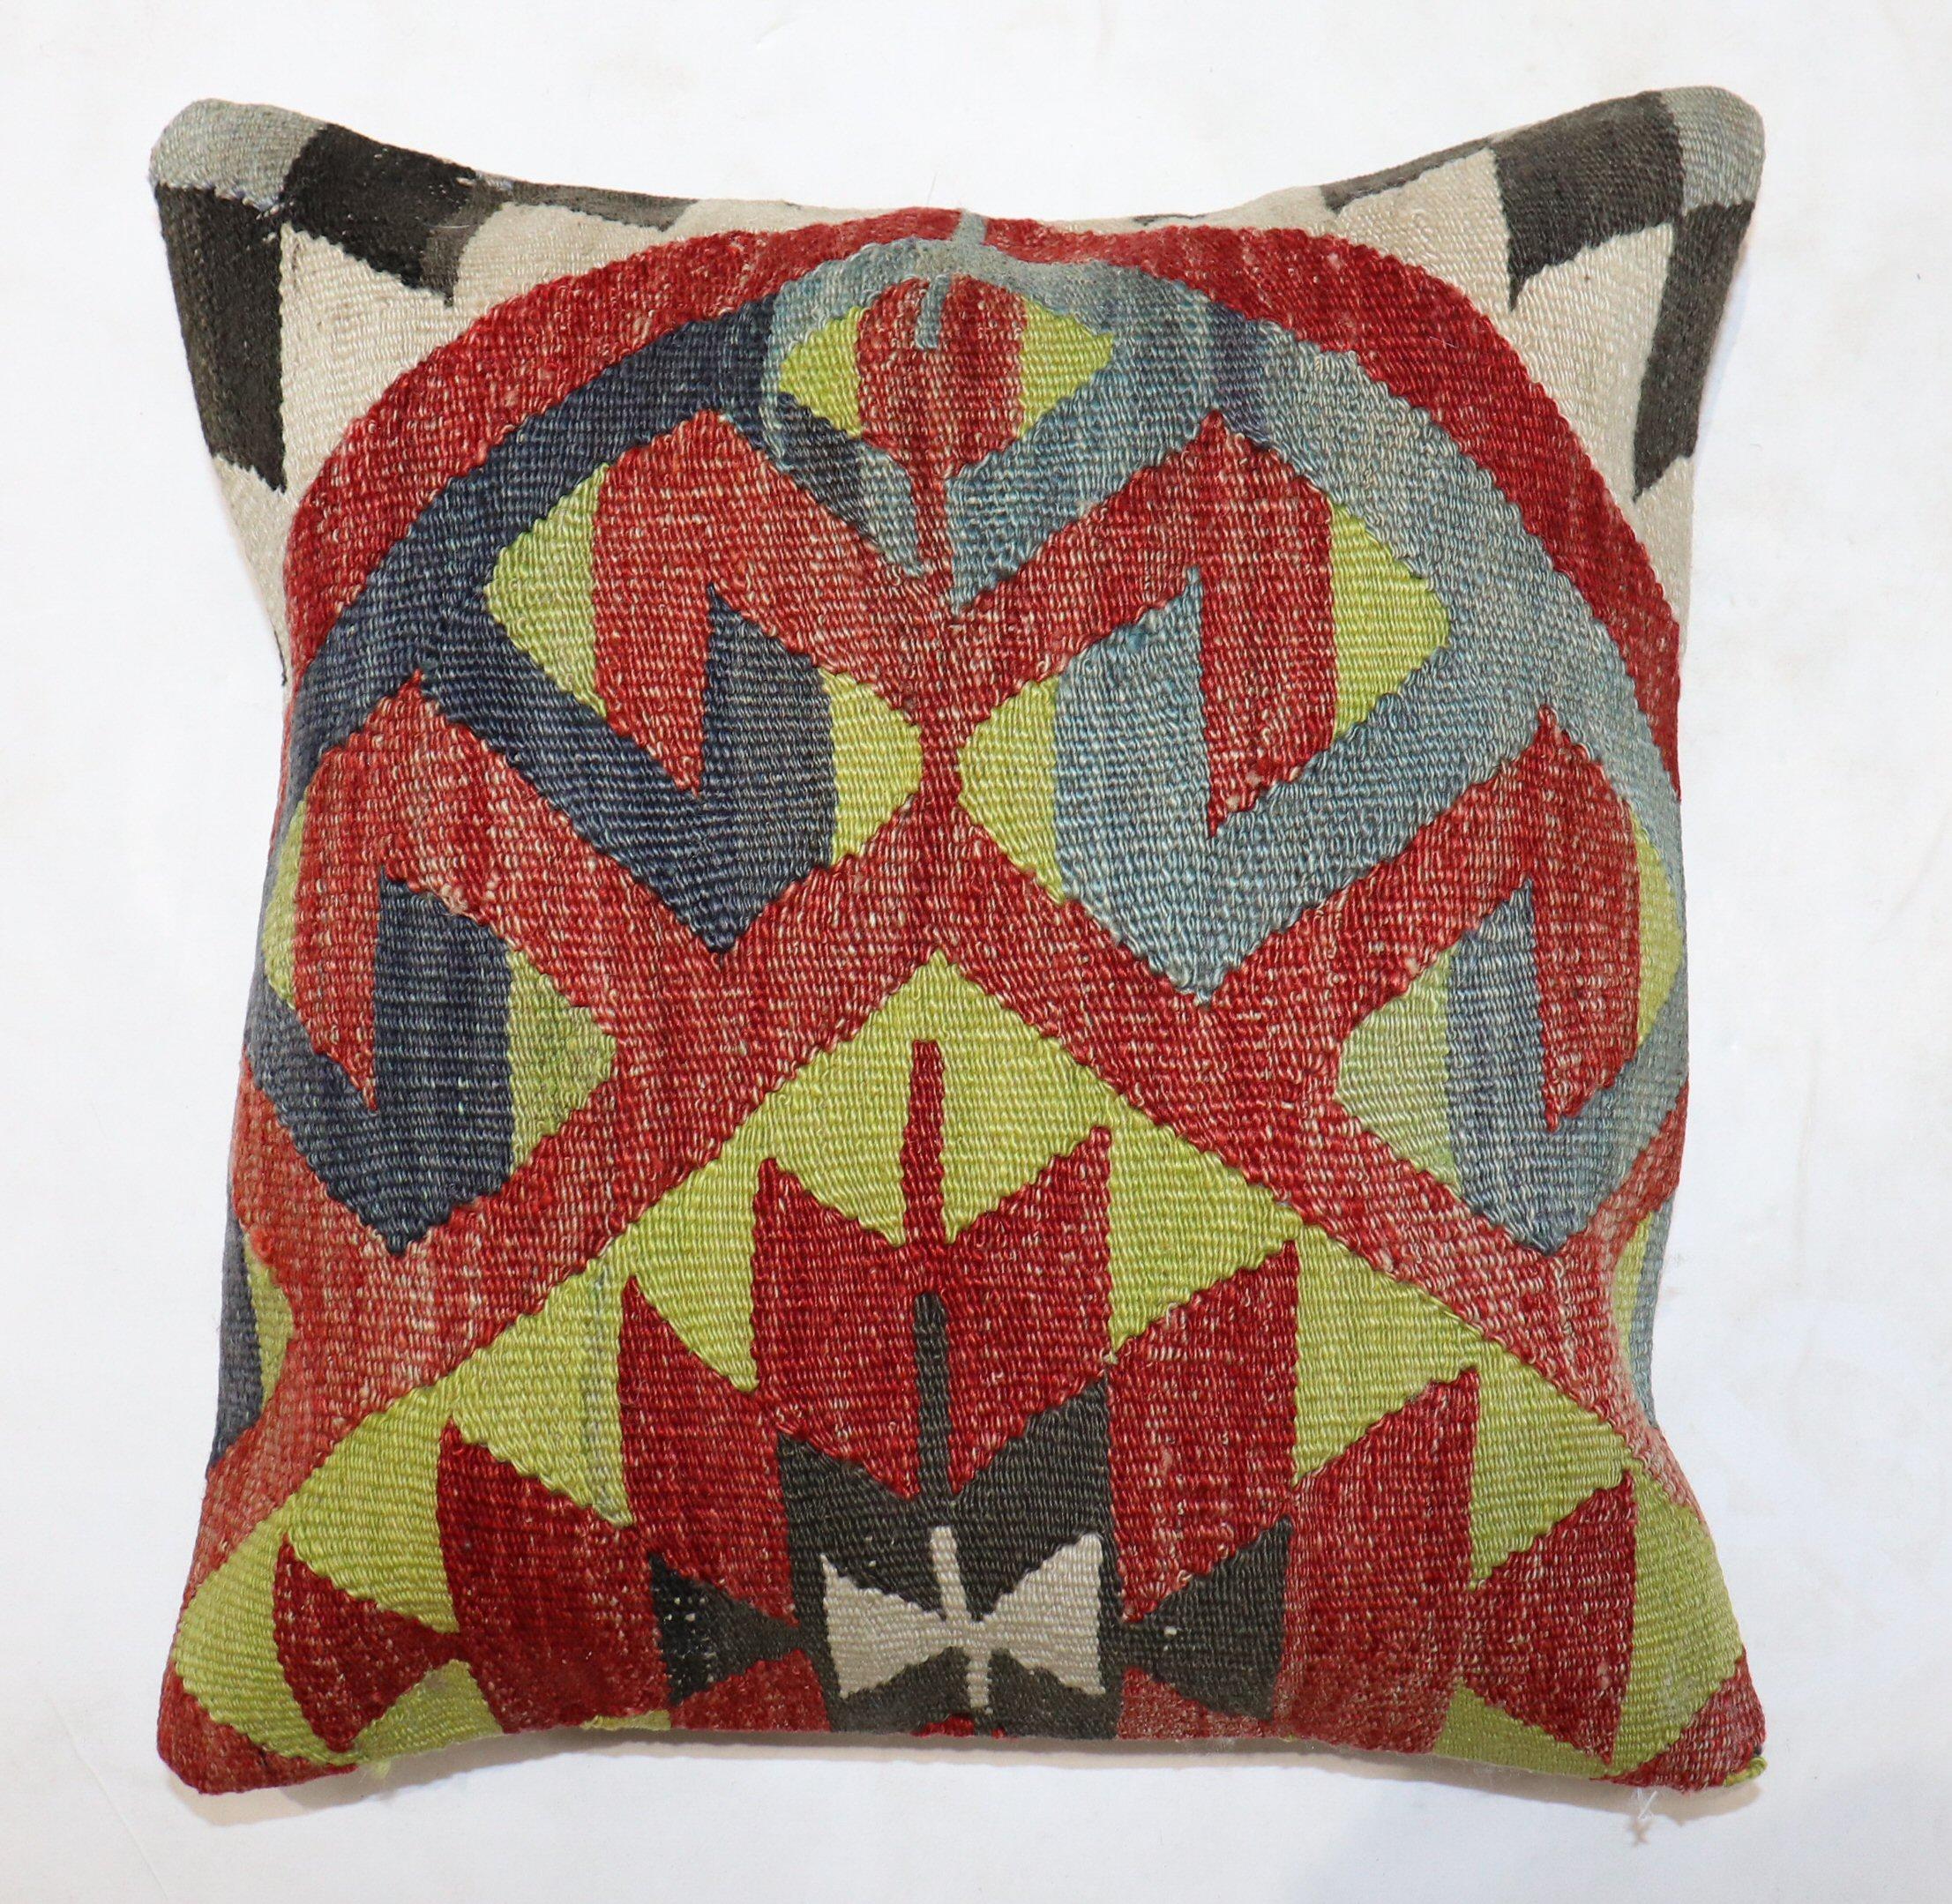 Kilim Square Rug Pillow In Good Condition For Sale In New York, NY